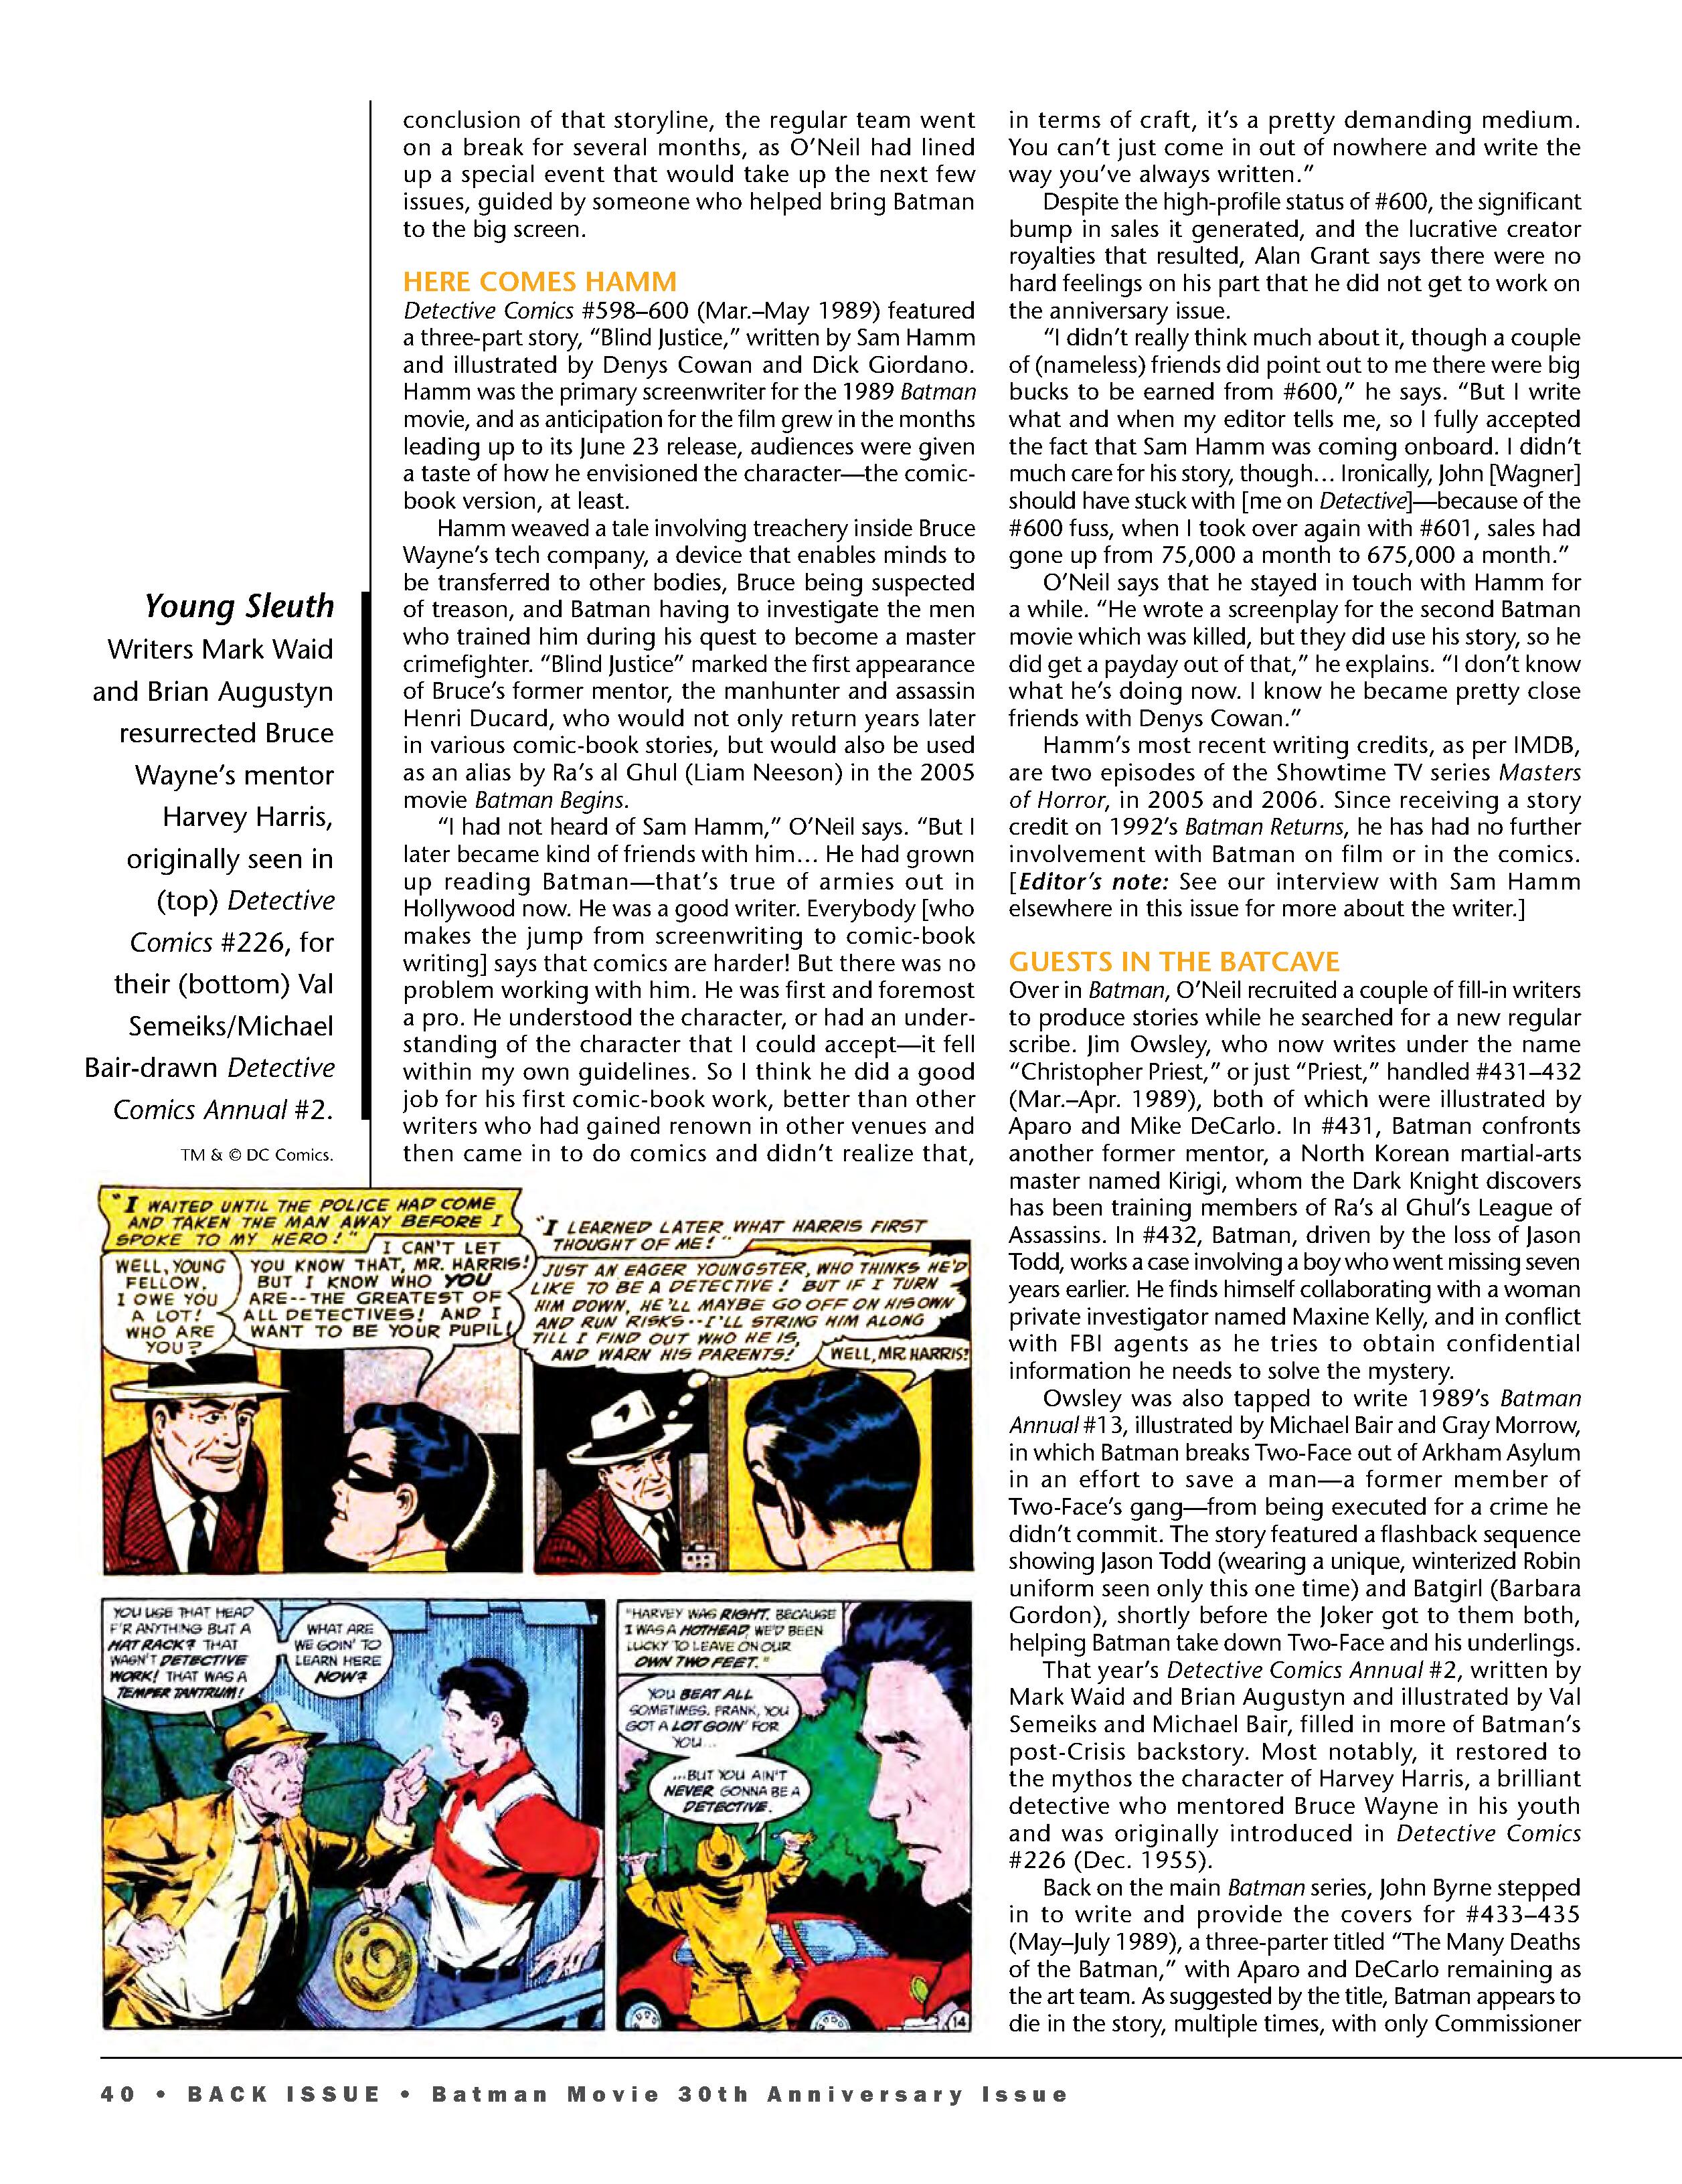 Read online Back Issue comic -  Issue #113 - 42